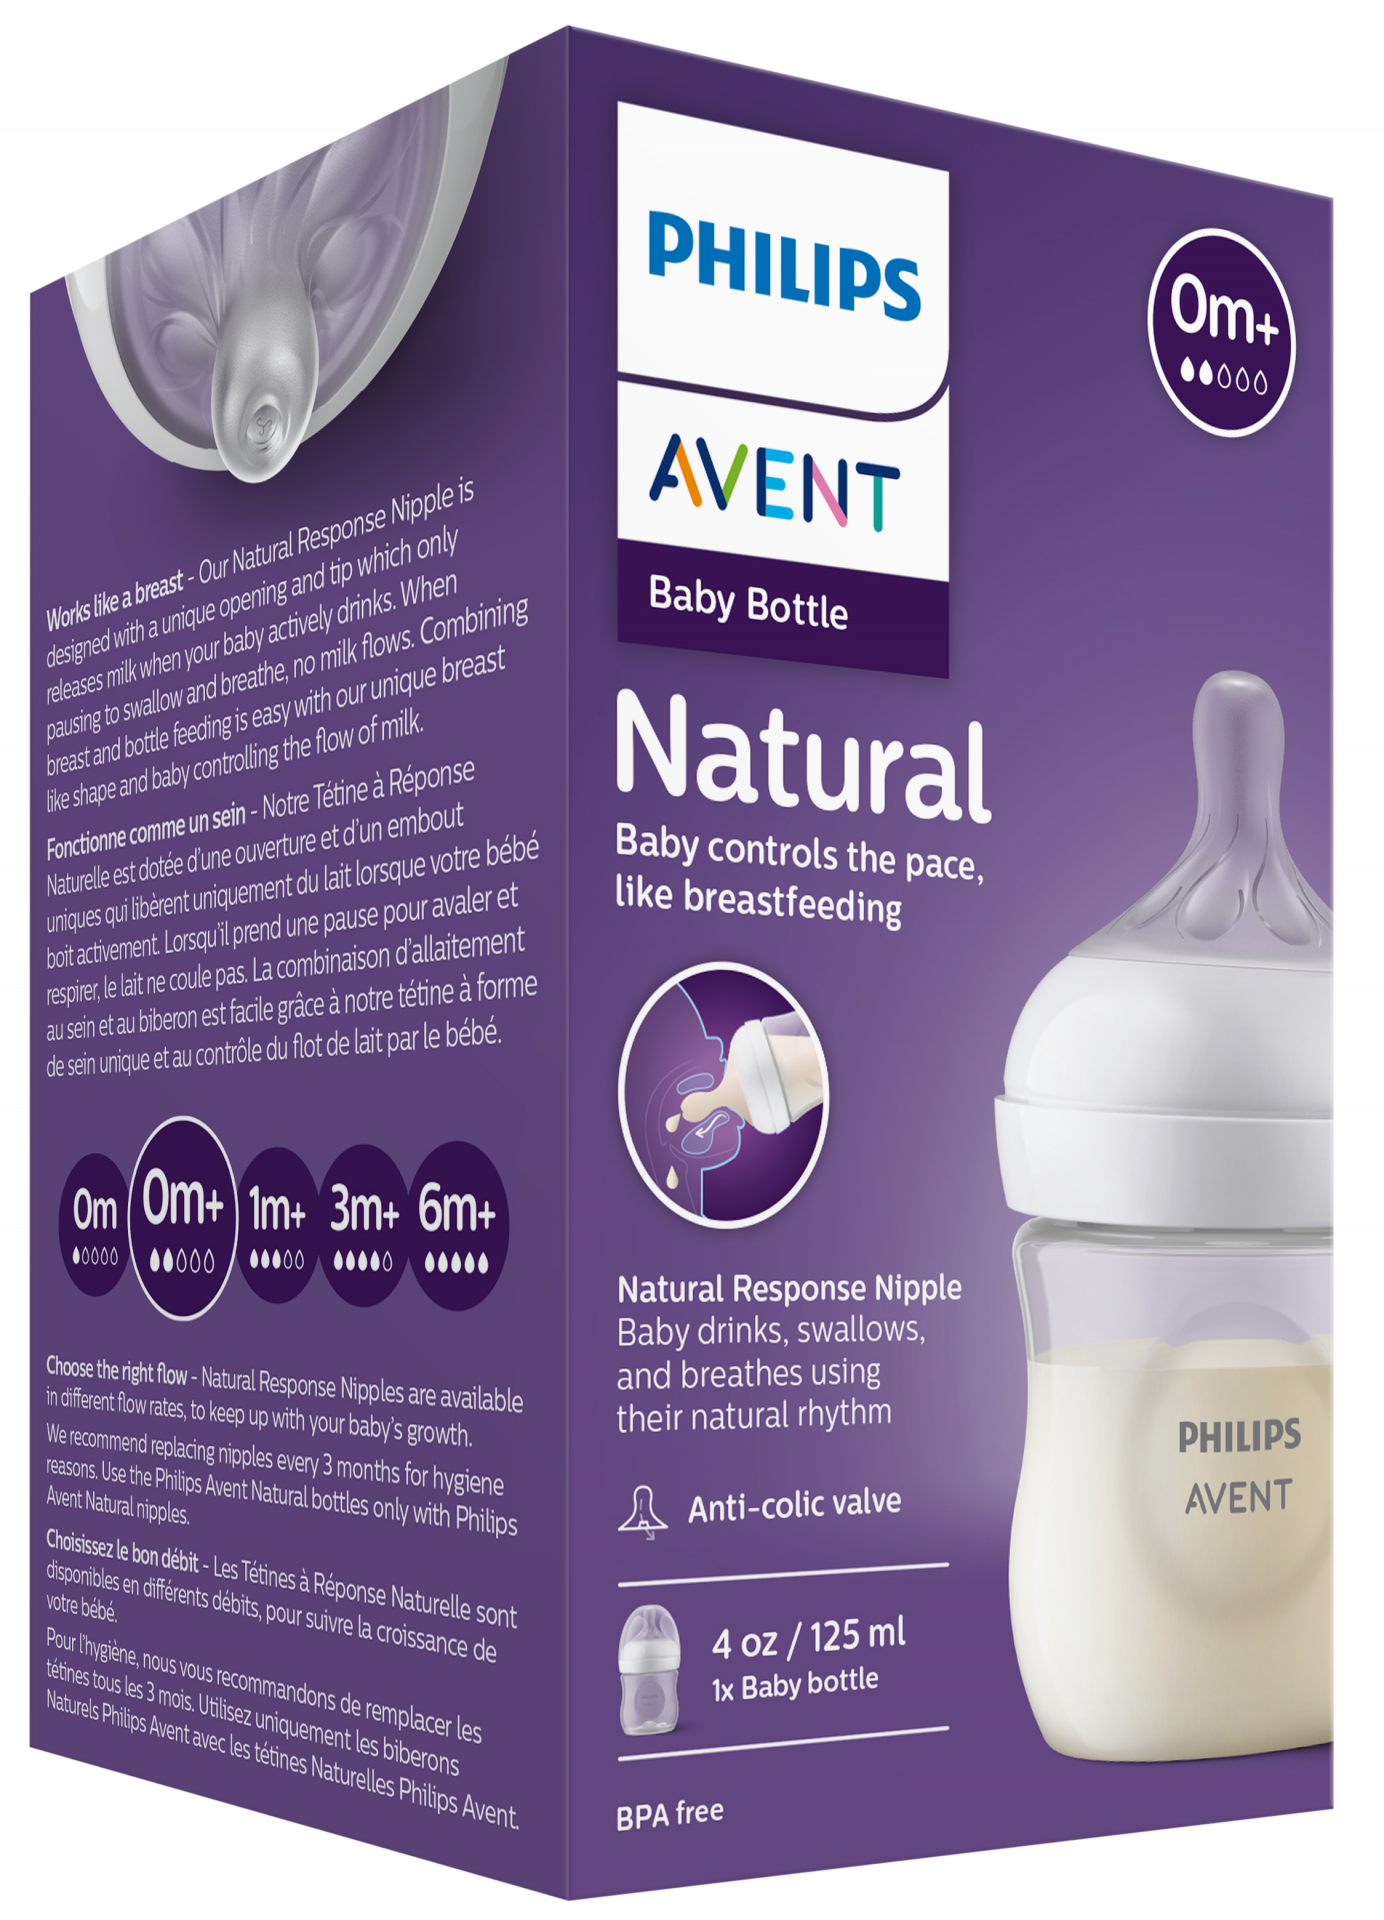 PHILIPS Avent Natural 0m+ bottle with nipple, 1 pcs.